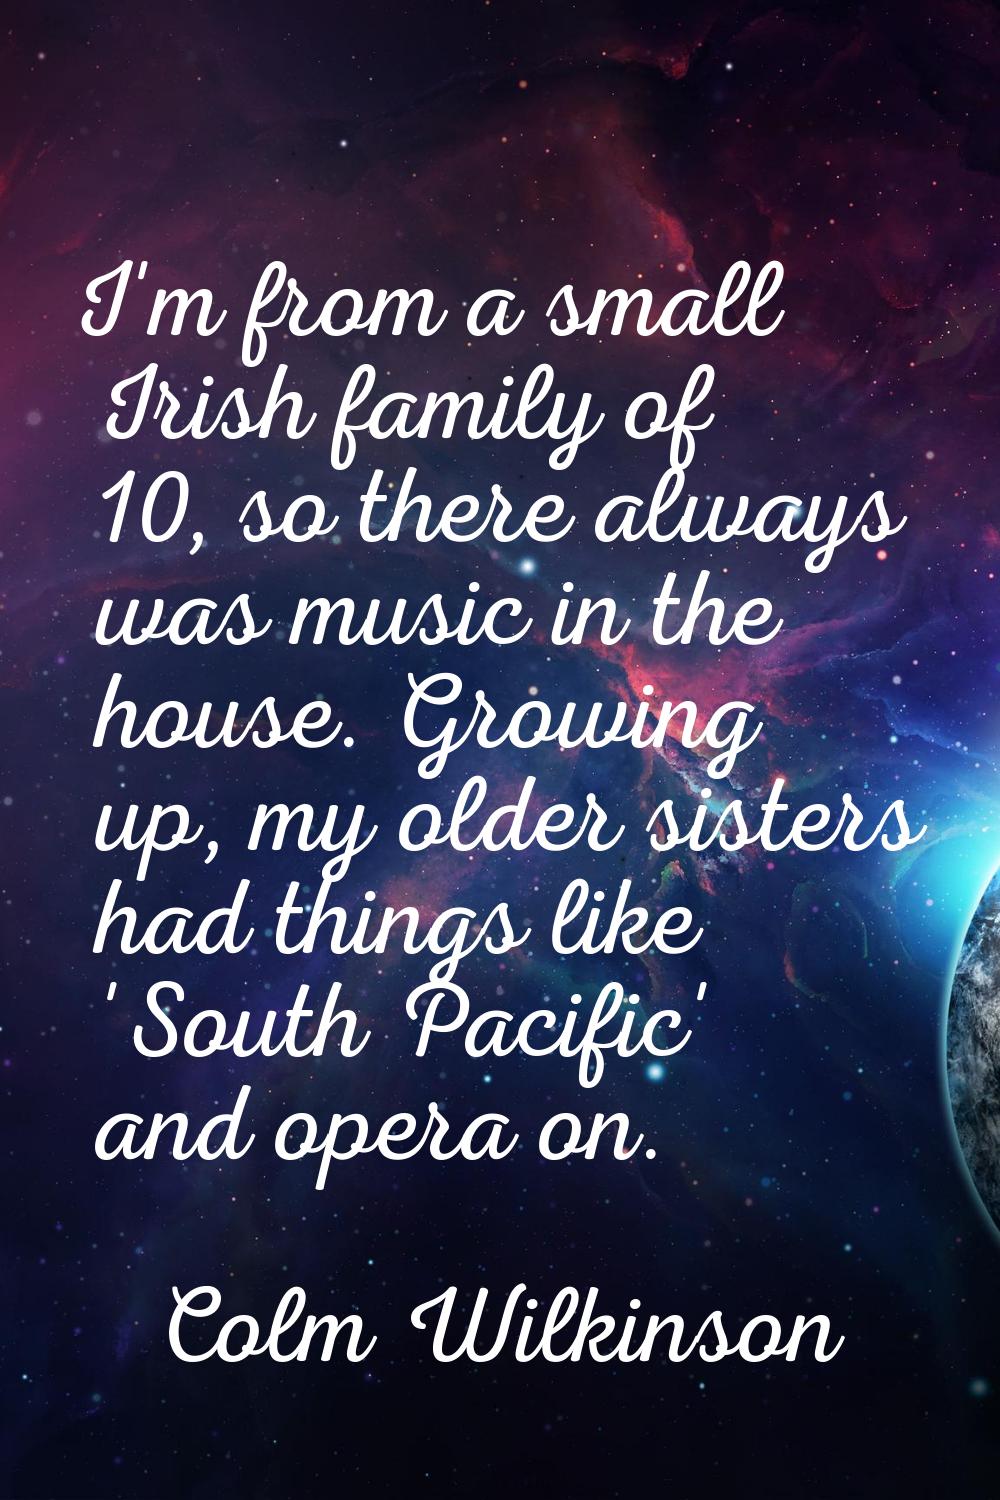 I'm from a small Irish family of 10, so there always was music in the house. Growing up, my older s